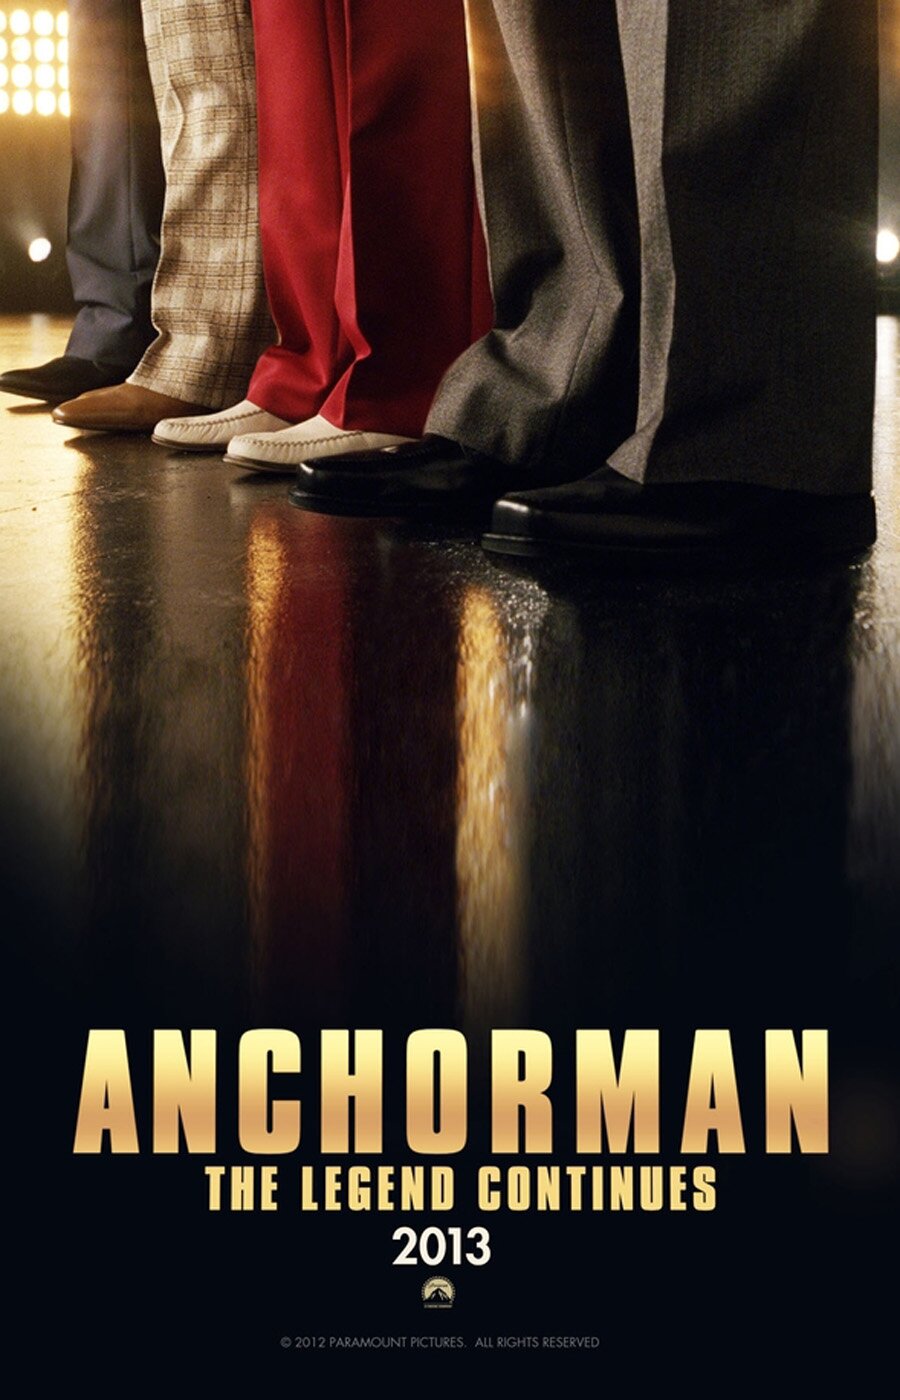 Anchorman 2 one-sheet poster